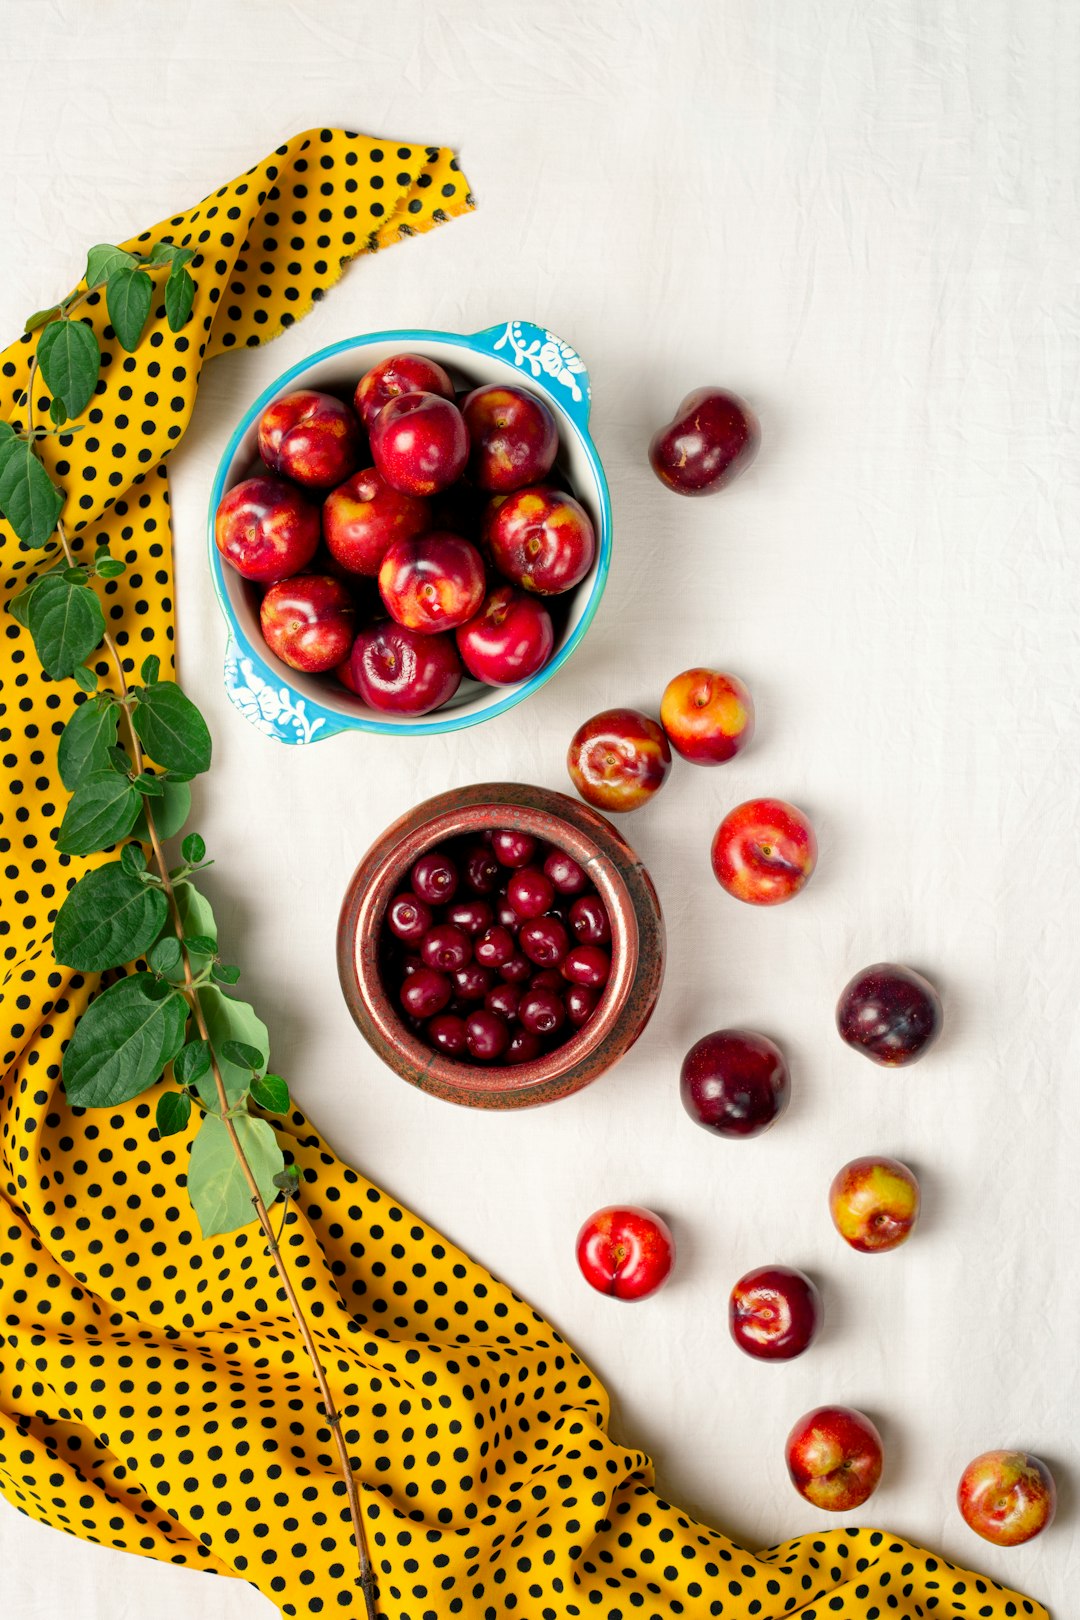 red round fruits on yellow and white polka dot textile